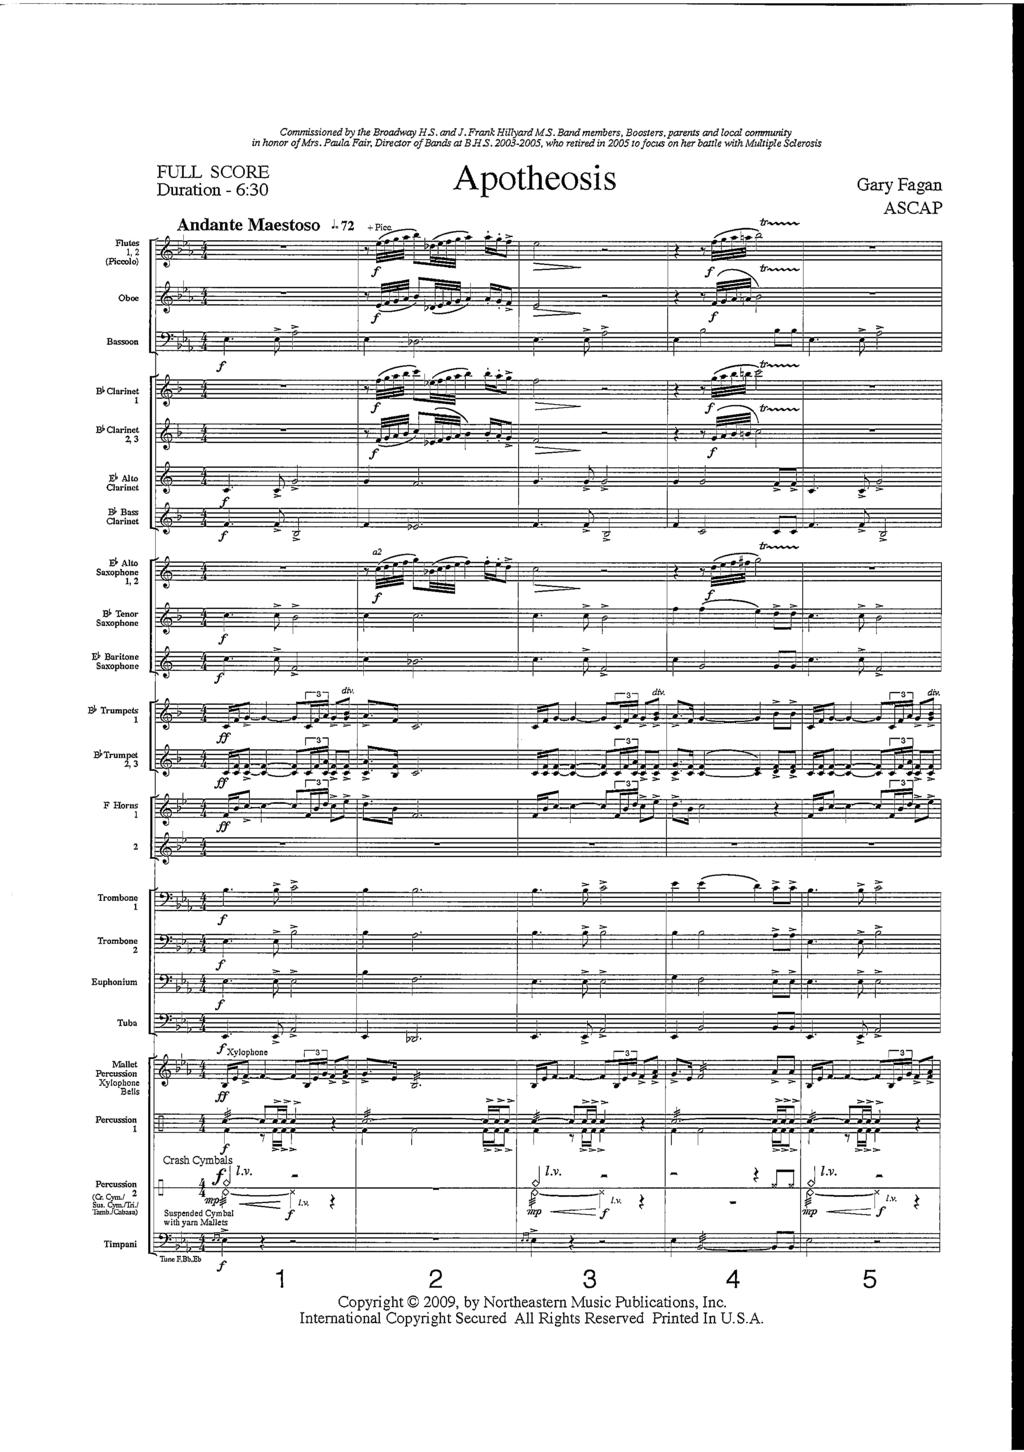 Fltes, (Piccolo) Oboe Bnssoon FULL SCORE Dration 630 0!... Commissioned by tlw Broadway H.S. and.frank Hillyard M.S. Band members, Boosters.parents and local commnity in honor oj Mrs.